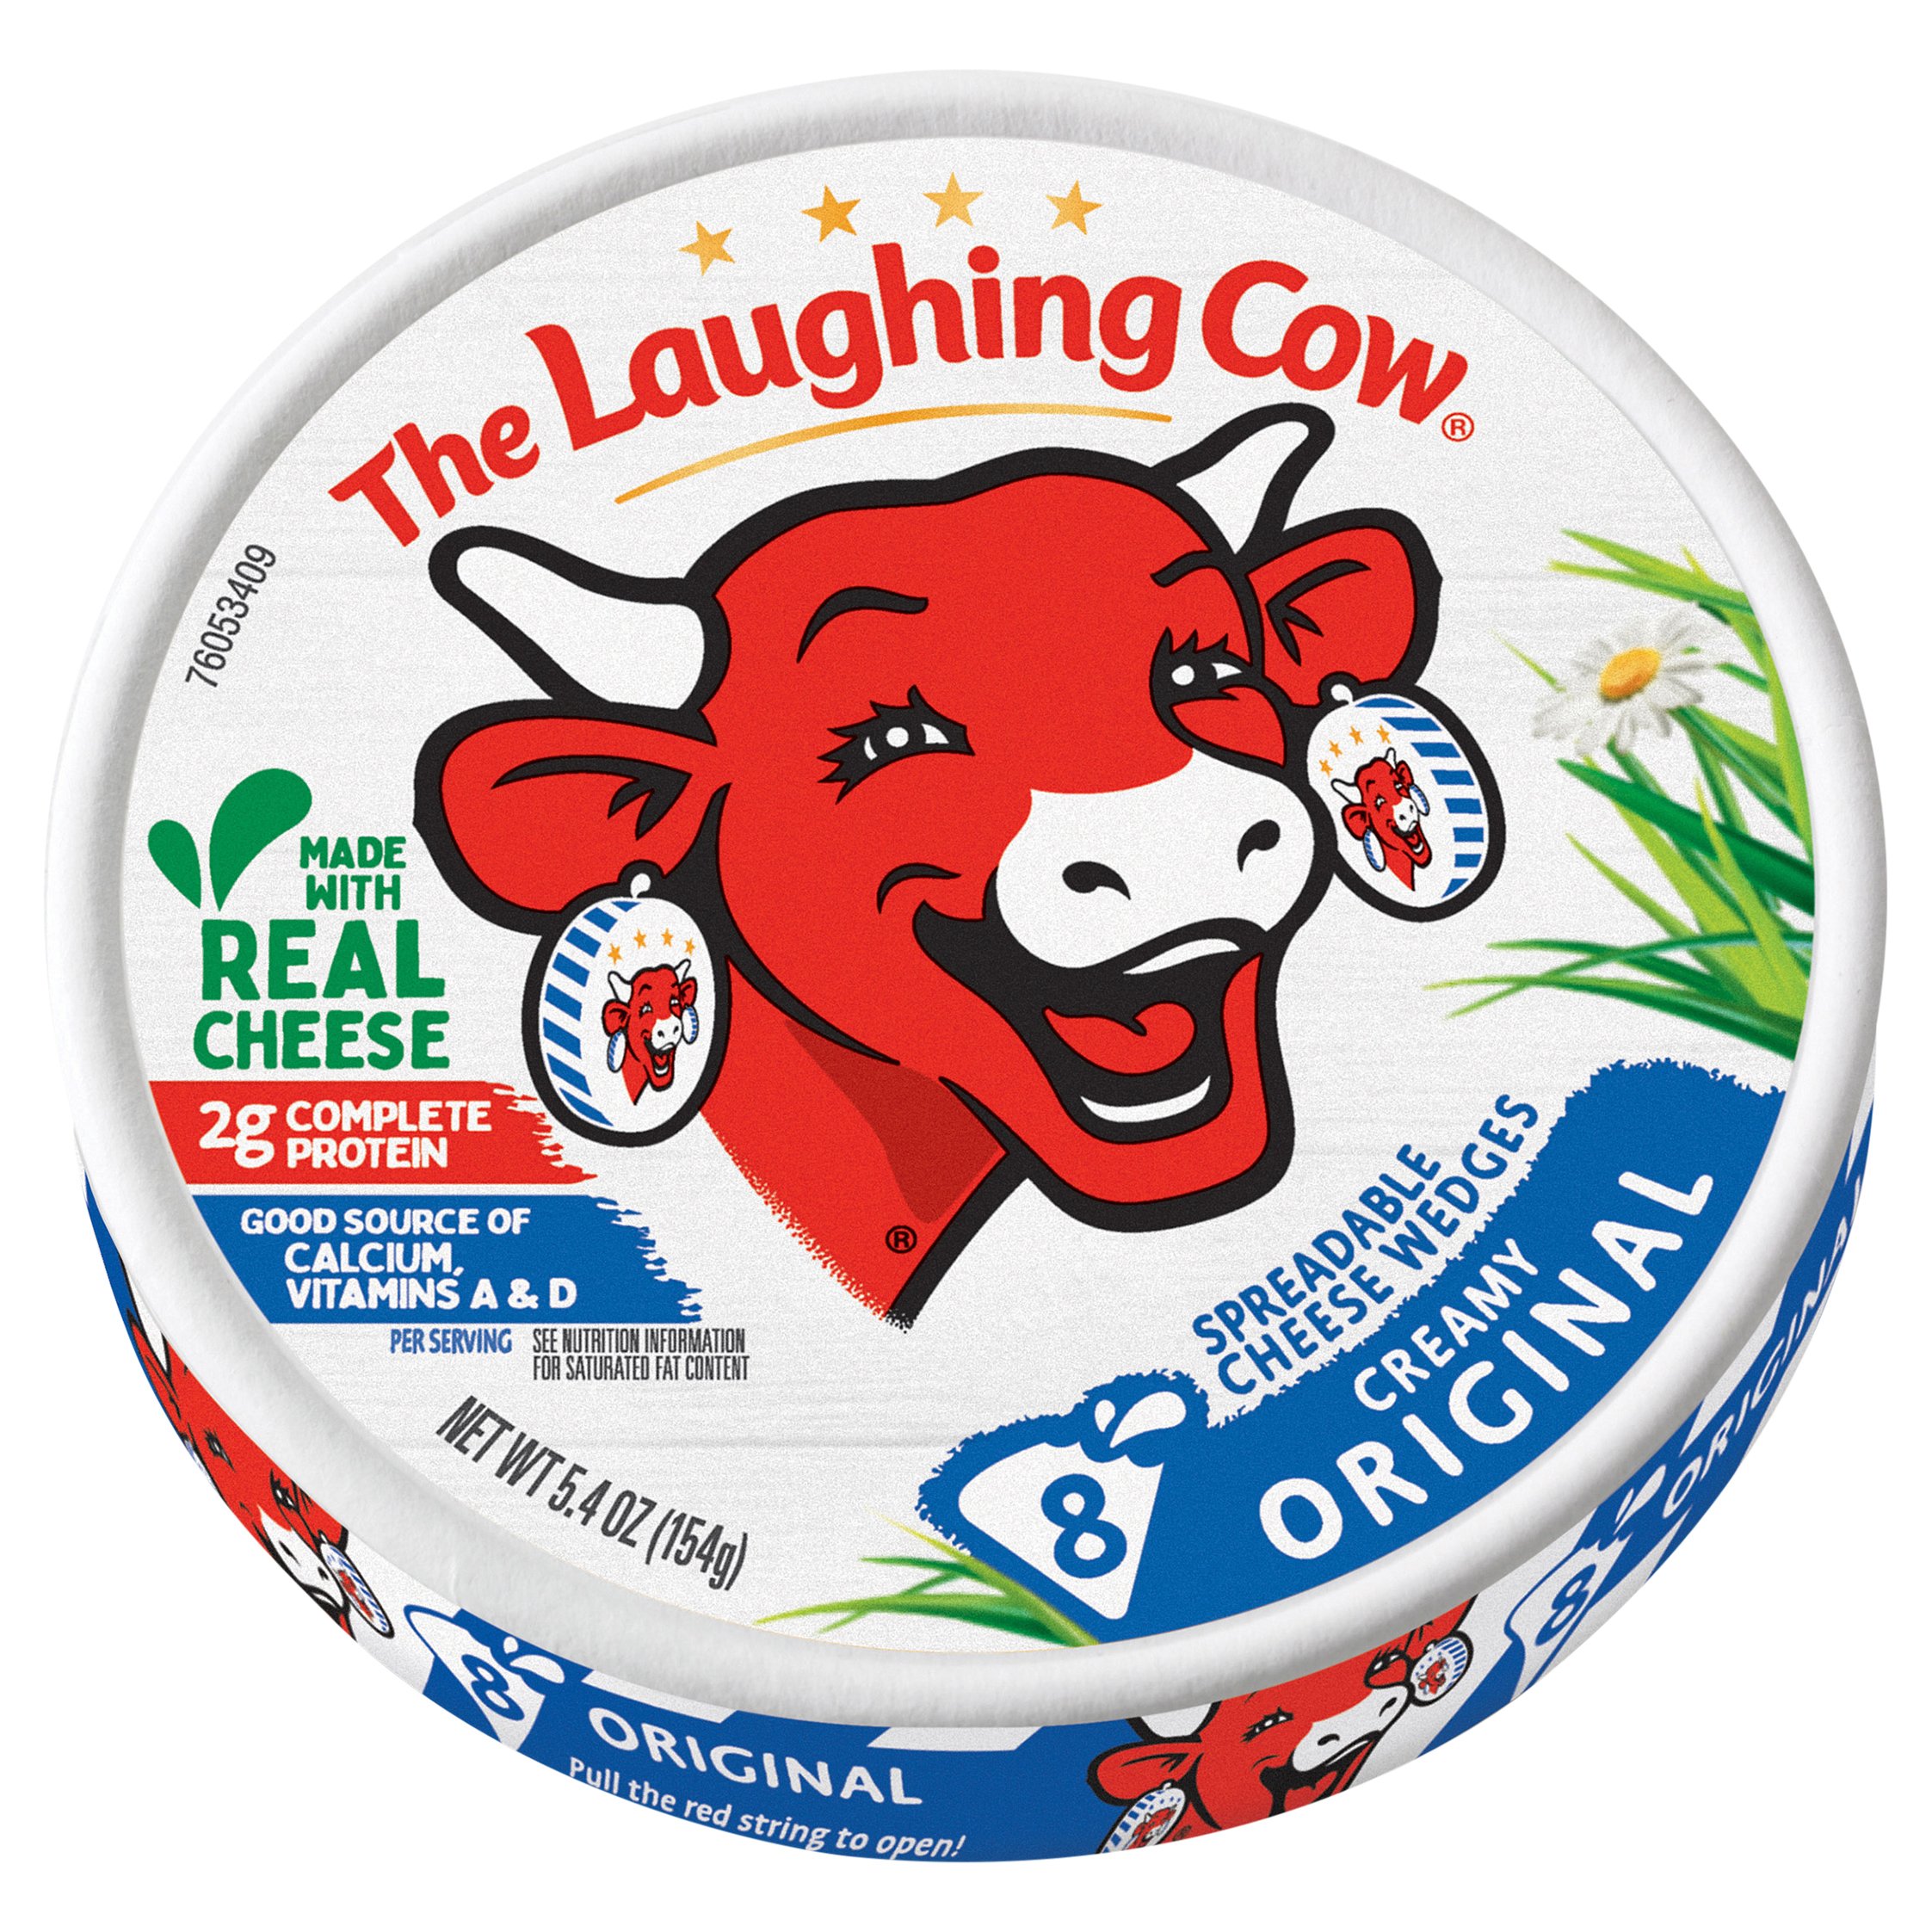 The Laughing Cow Spreadable Cheese Wedges Creamy Original Shop